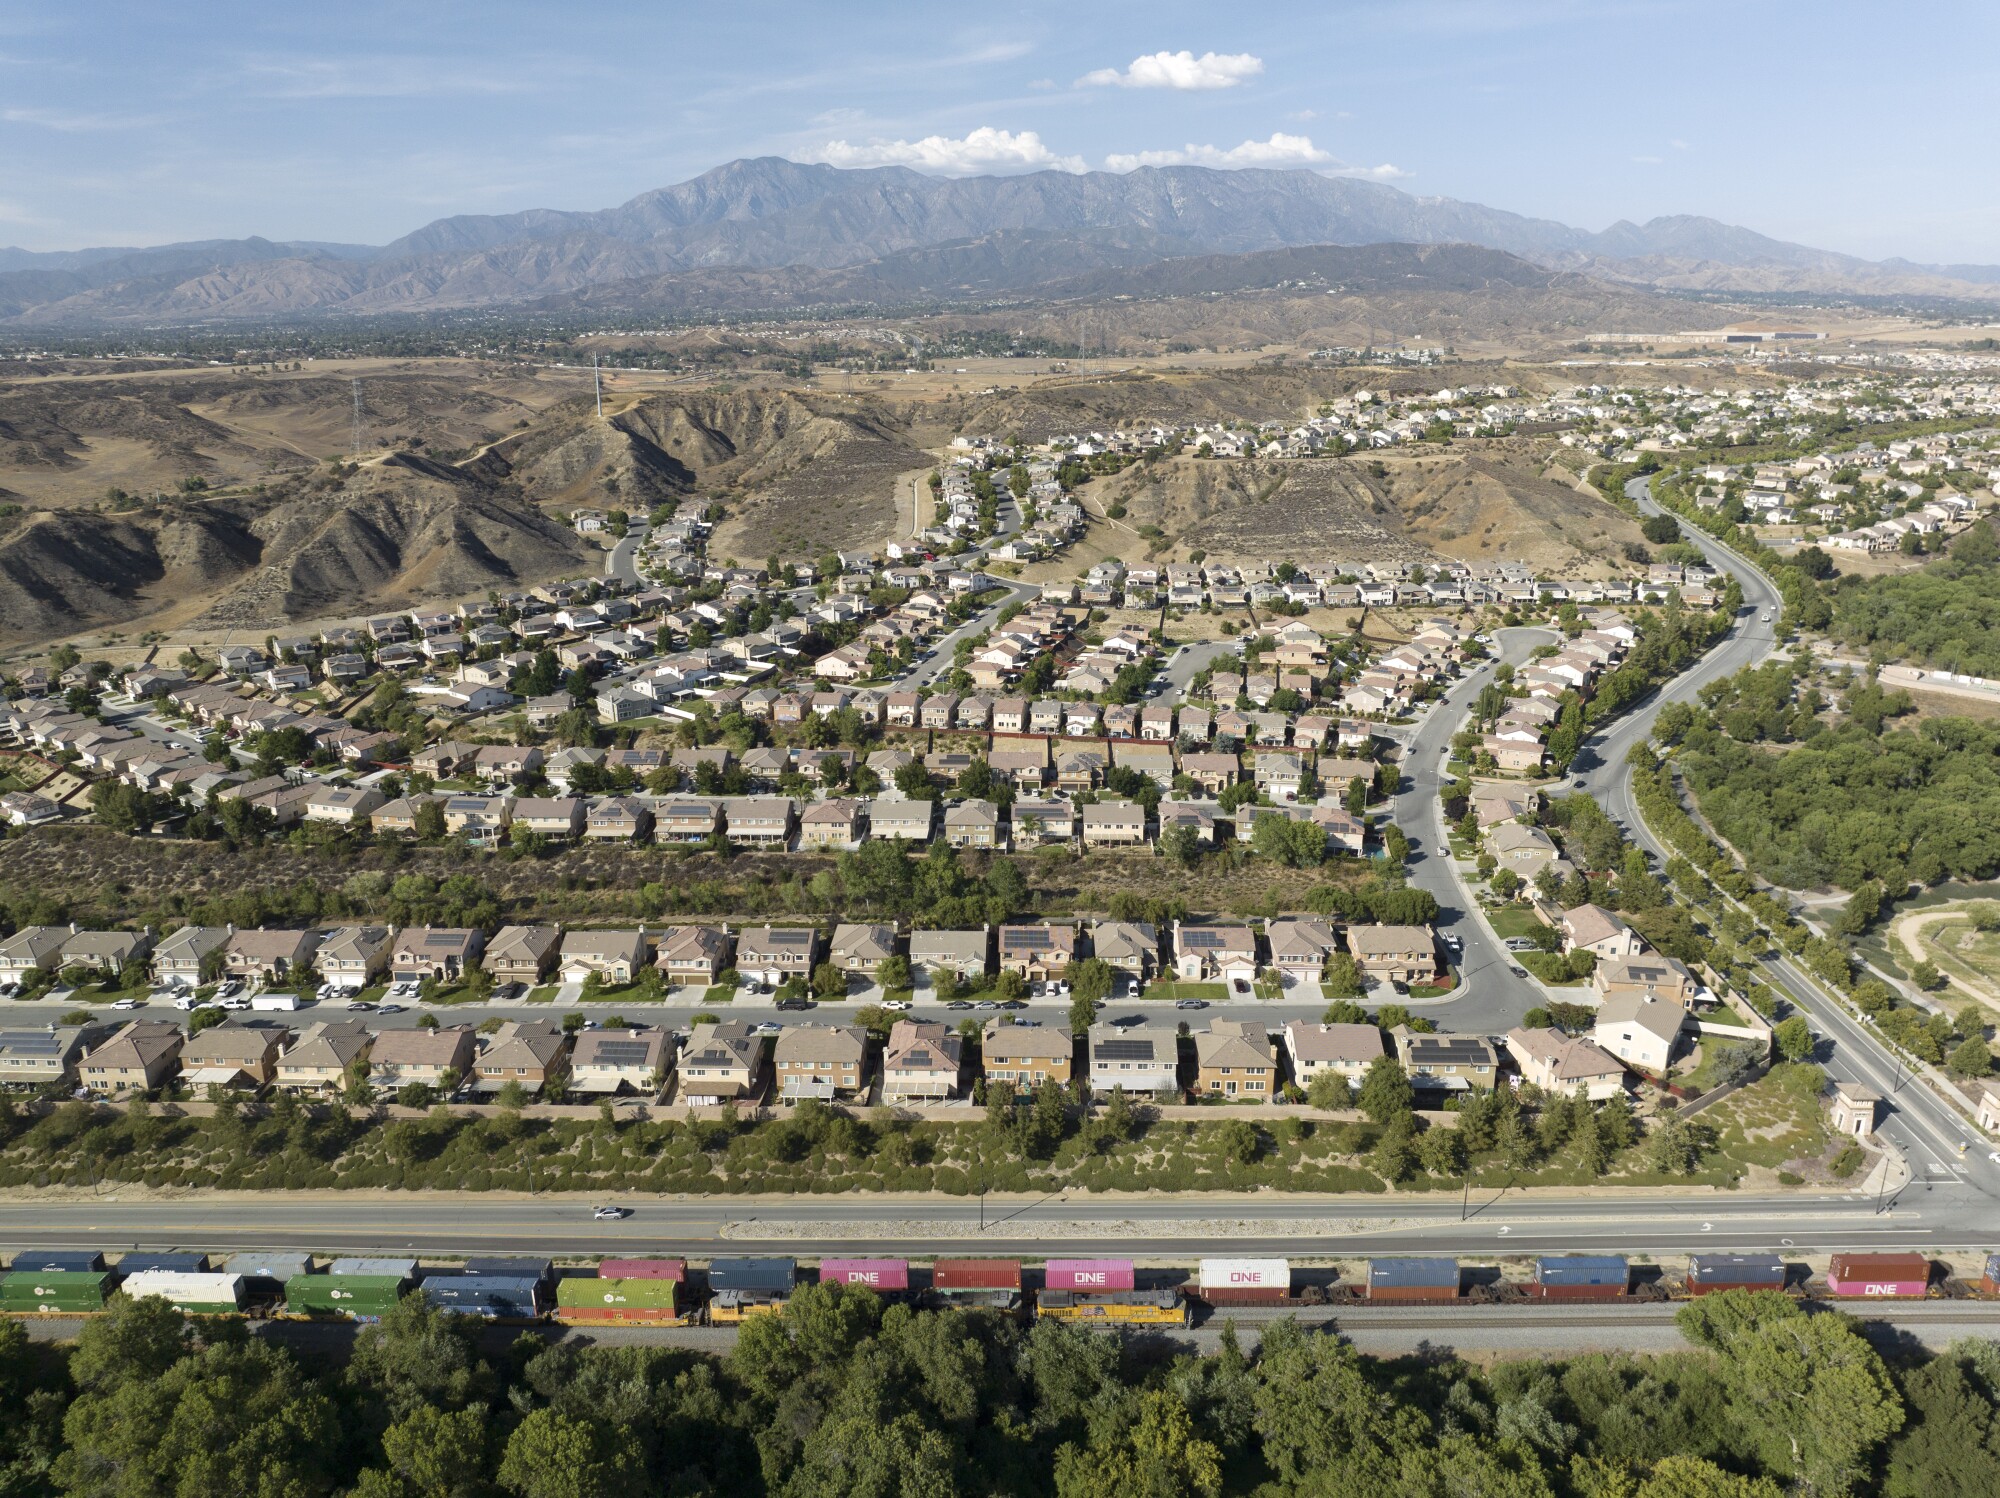 A train passing a housing development with mountains in the background